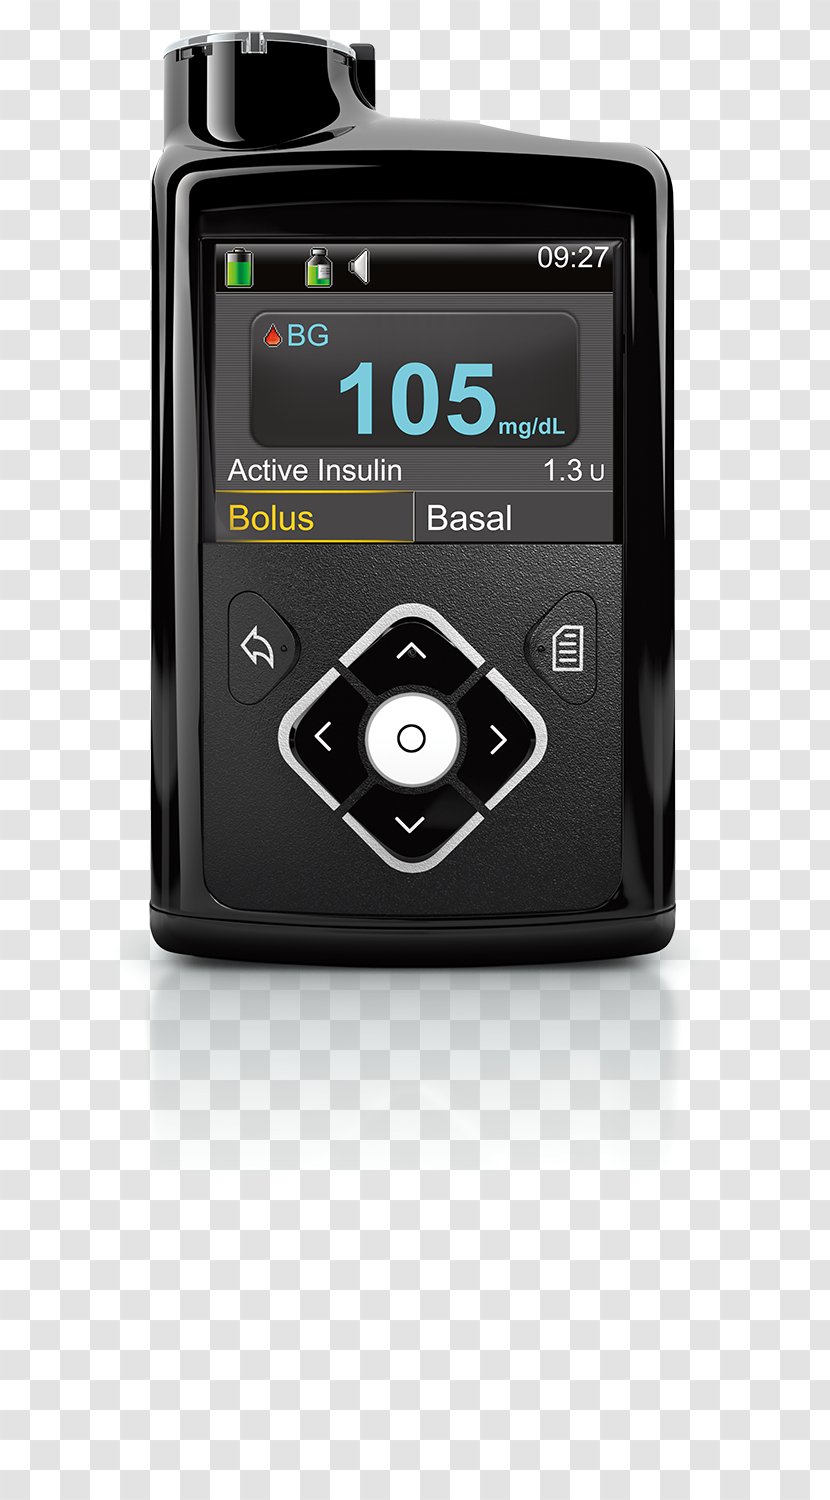 Minimed Paradigm Medtronic Insulin Pump Blood Glucose Meters Monitoring Transparent PNG